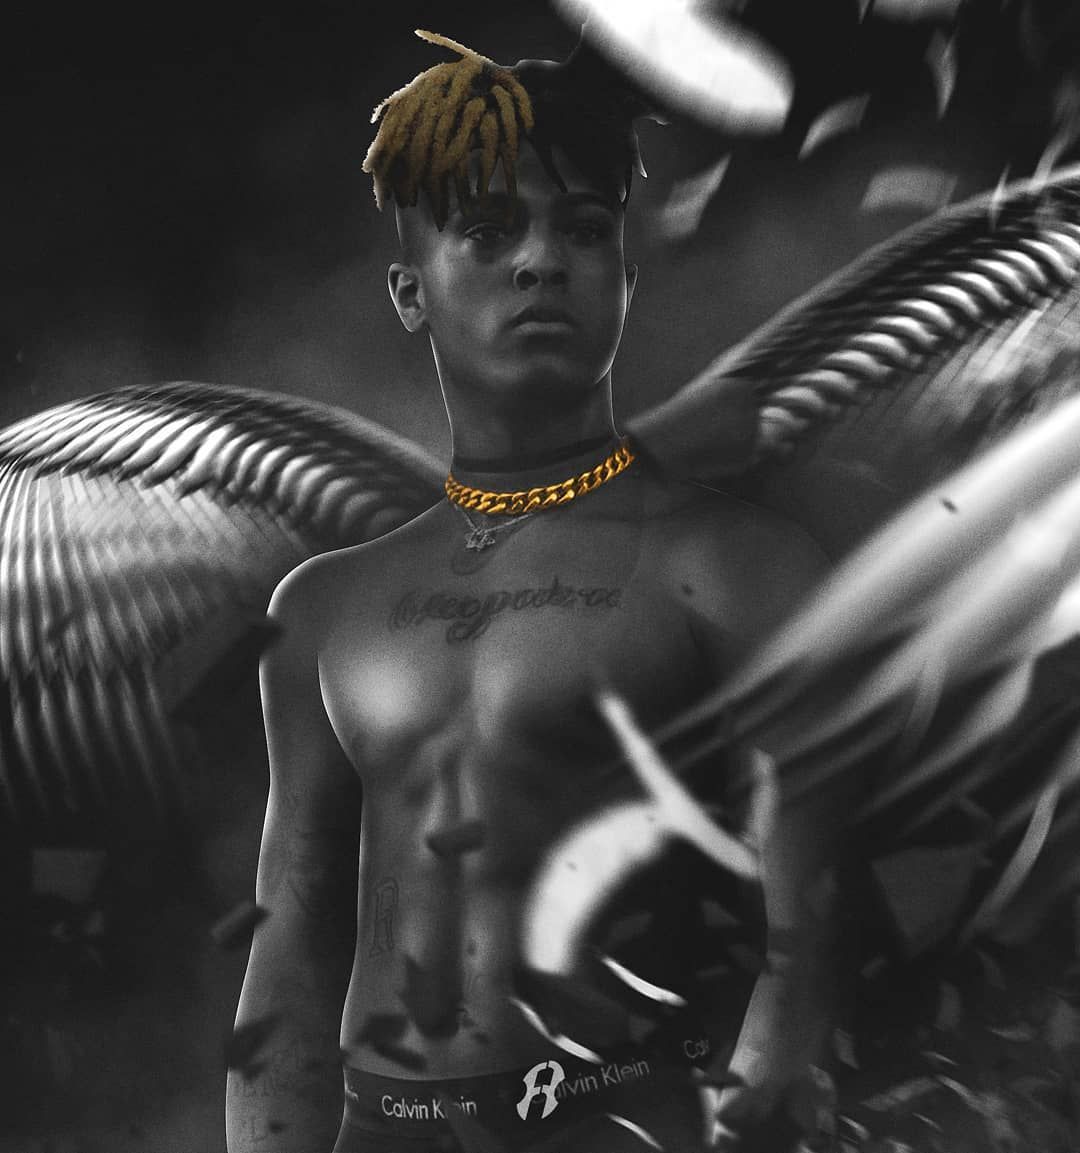 A black and white photo of a shirtless man with yellow hair and a gold chain around his neck. - XXXTentacion